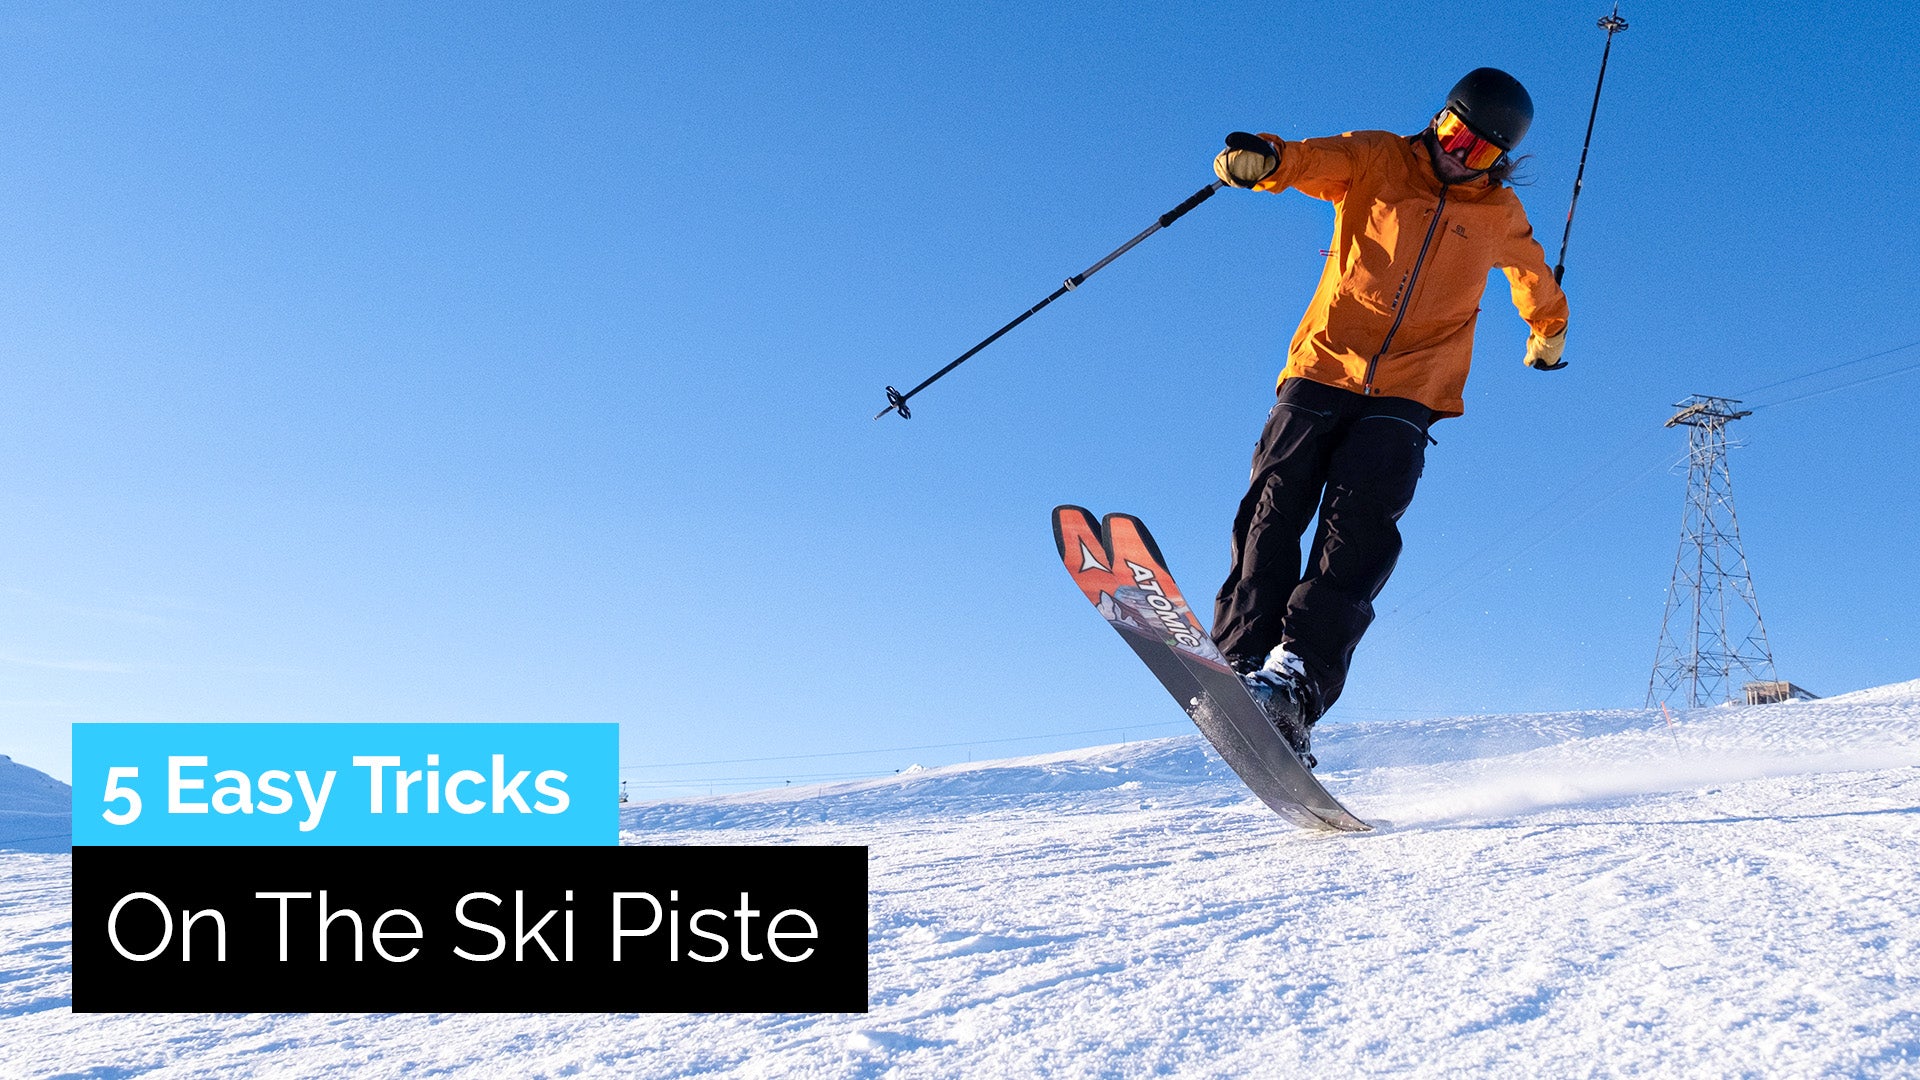 5 Easy Tricks You Can Do on the Ski Slope